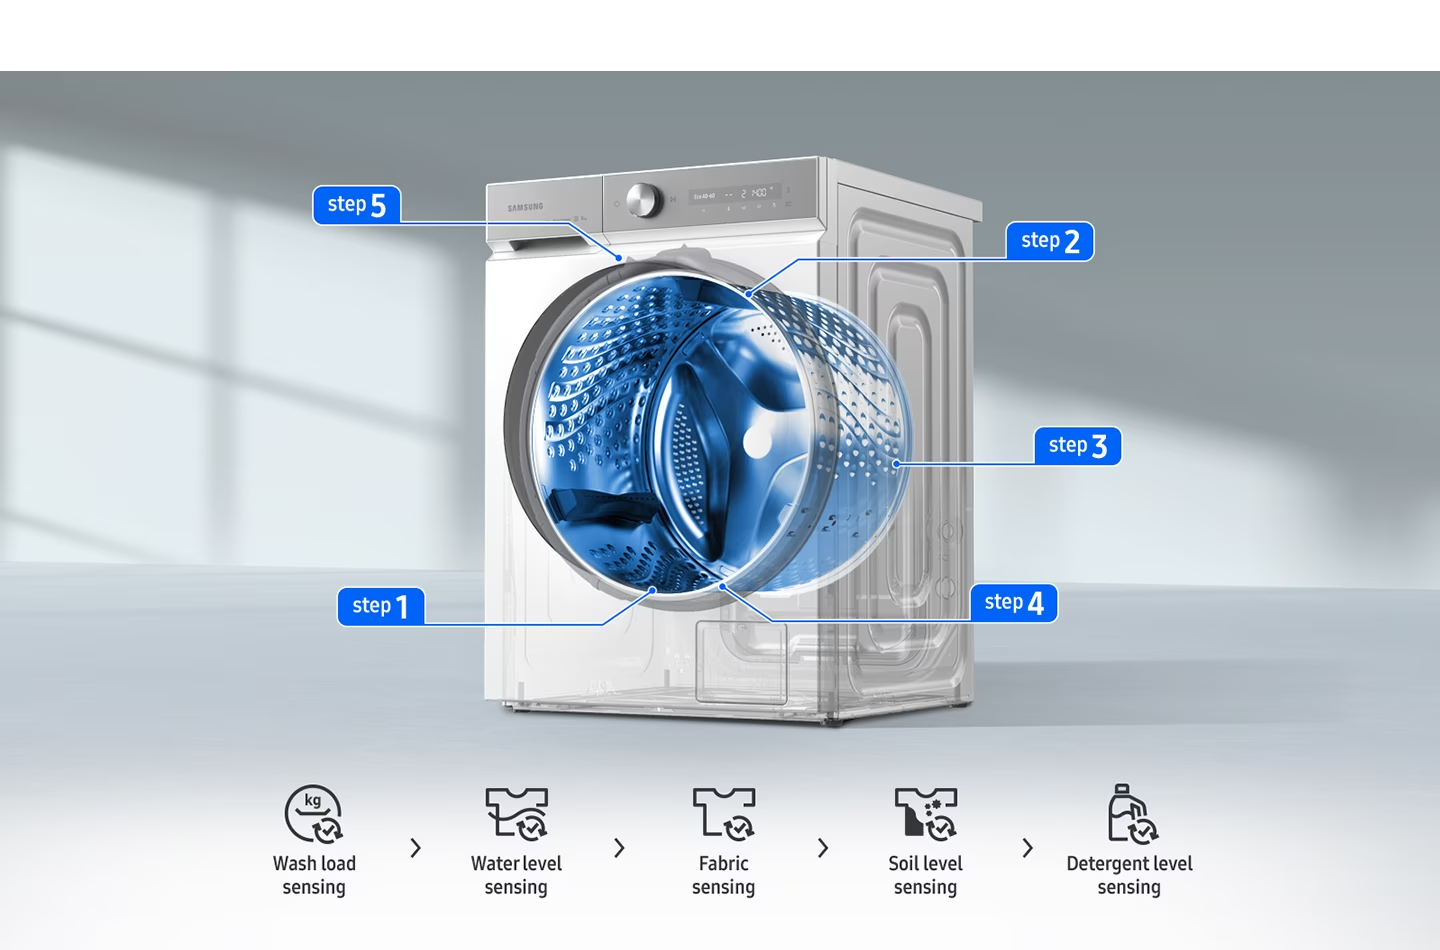 Description: The location of the Step 1: wash load, Step 2: water level, Step 3: fabric sensing, Step 4: soil level, and Step 5: detergent level sensors appears on the transparent washer in order. In Step 4 , AI changes the time depending on soil level and users can control it with SmartThings app.